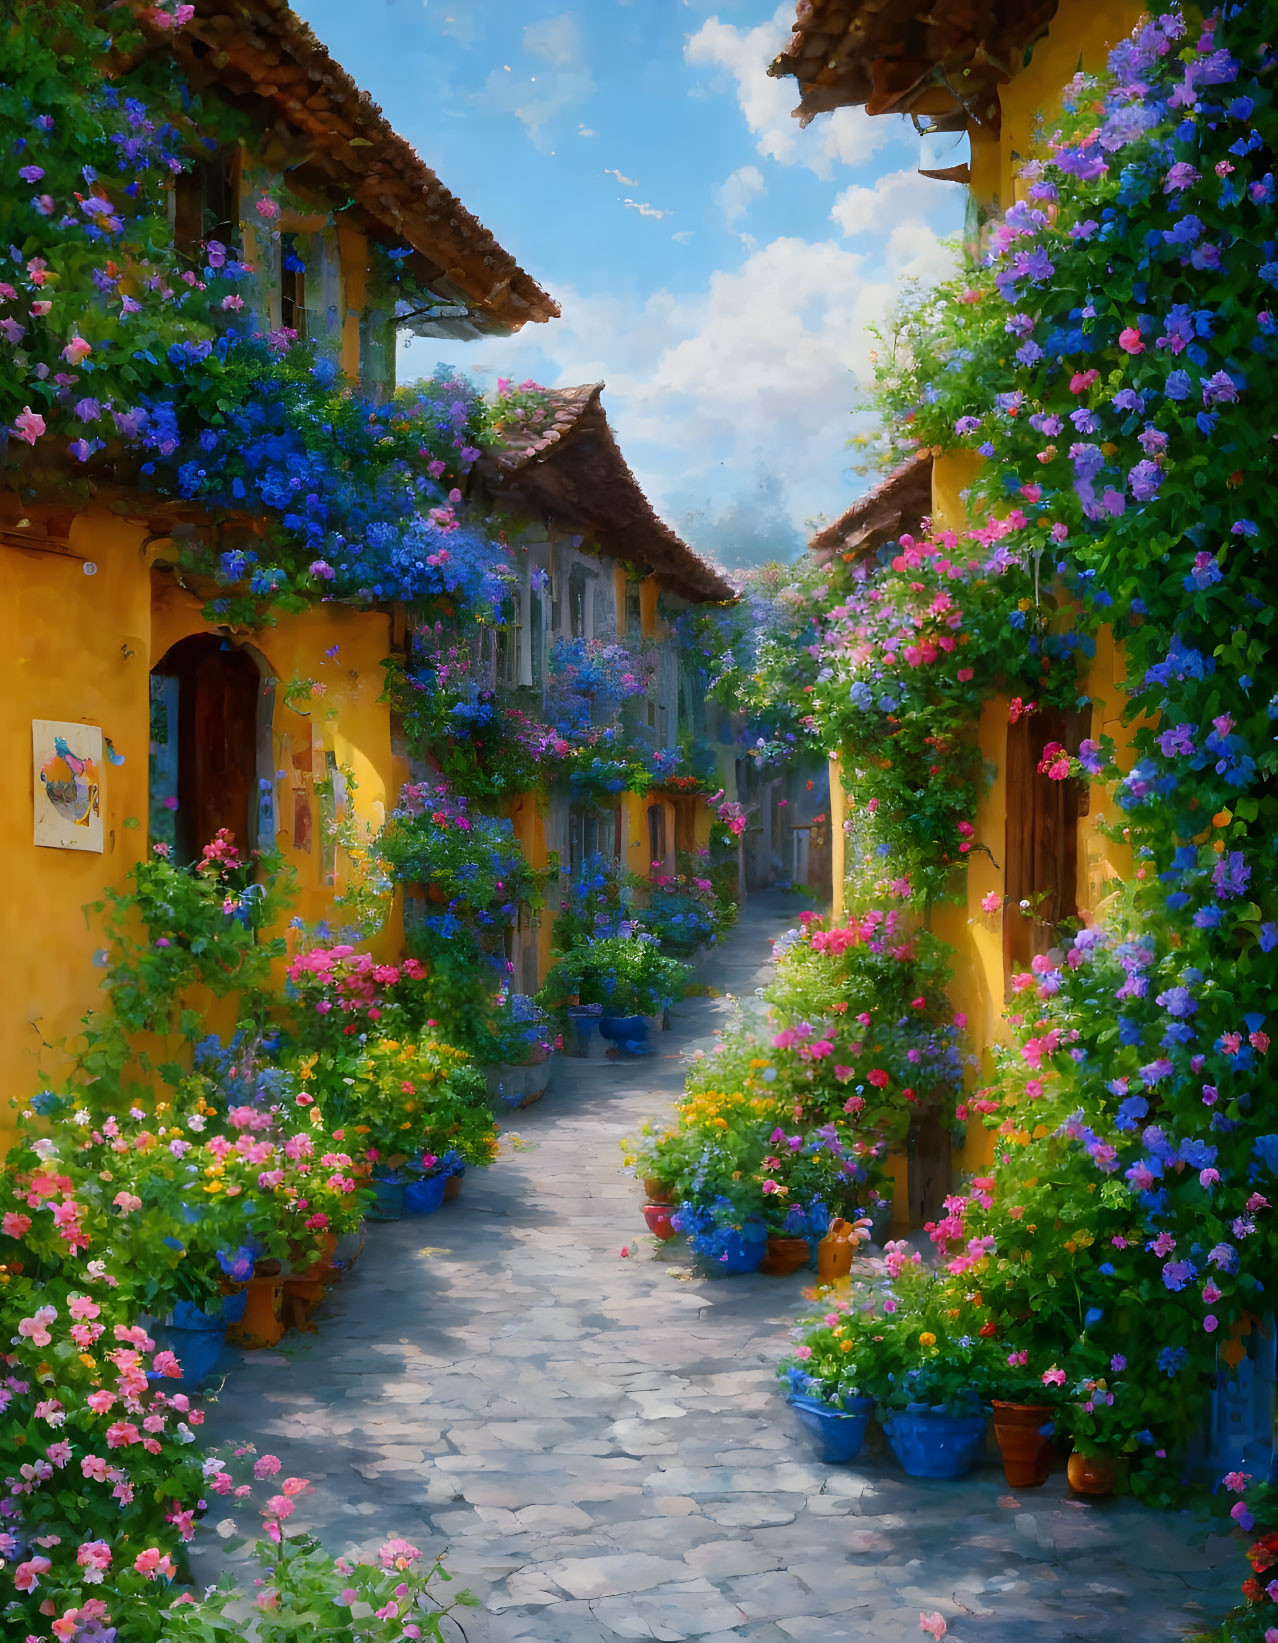 Charming cobblestone street with yellow houses and colorful flowers